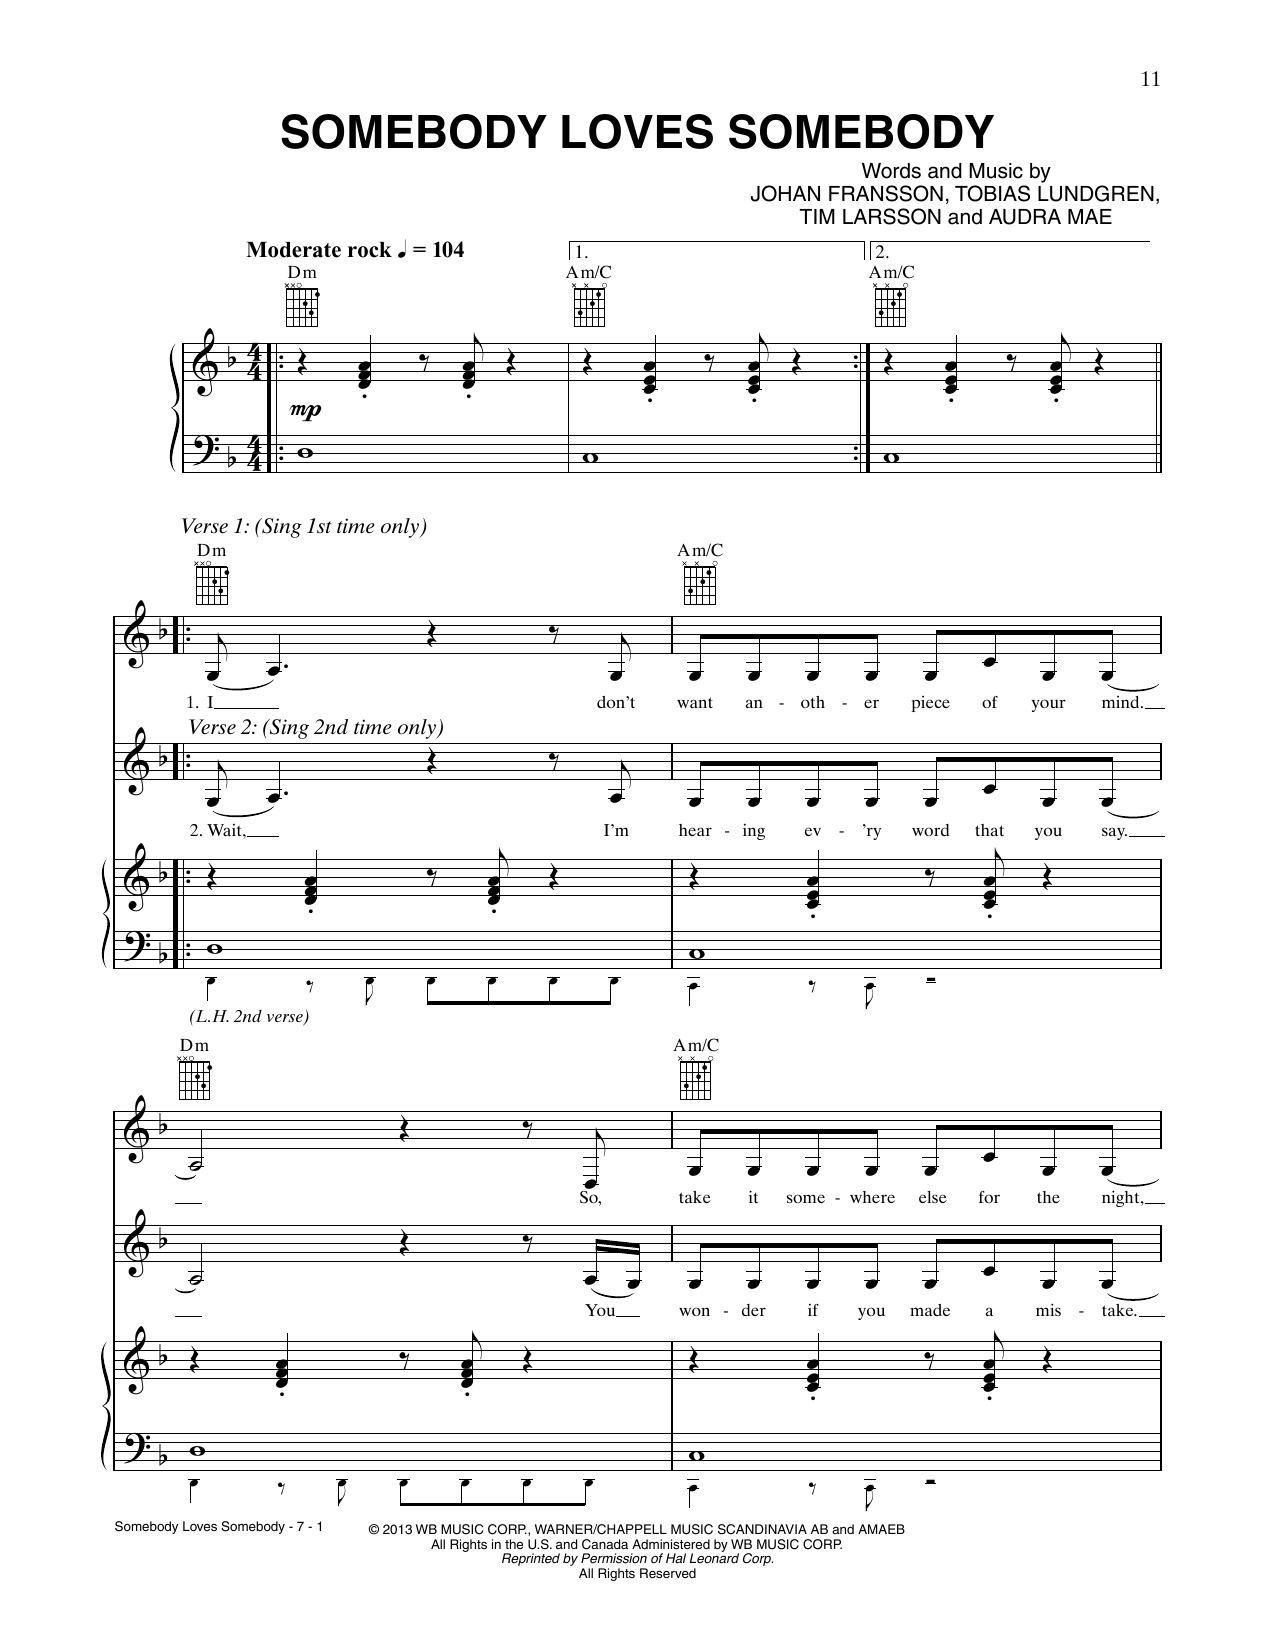 Download CÉLINE DION Somebody Loves Somebody Sheet Music